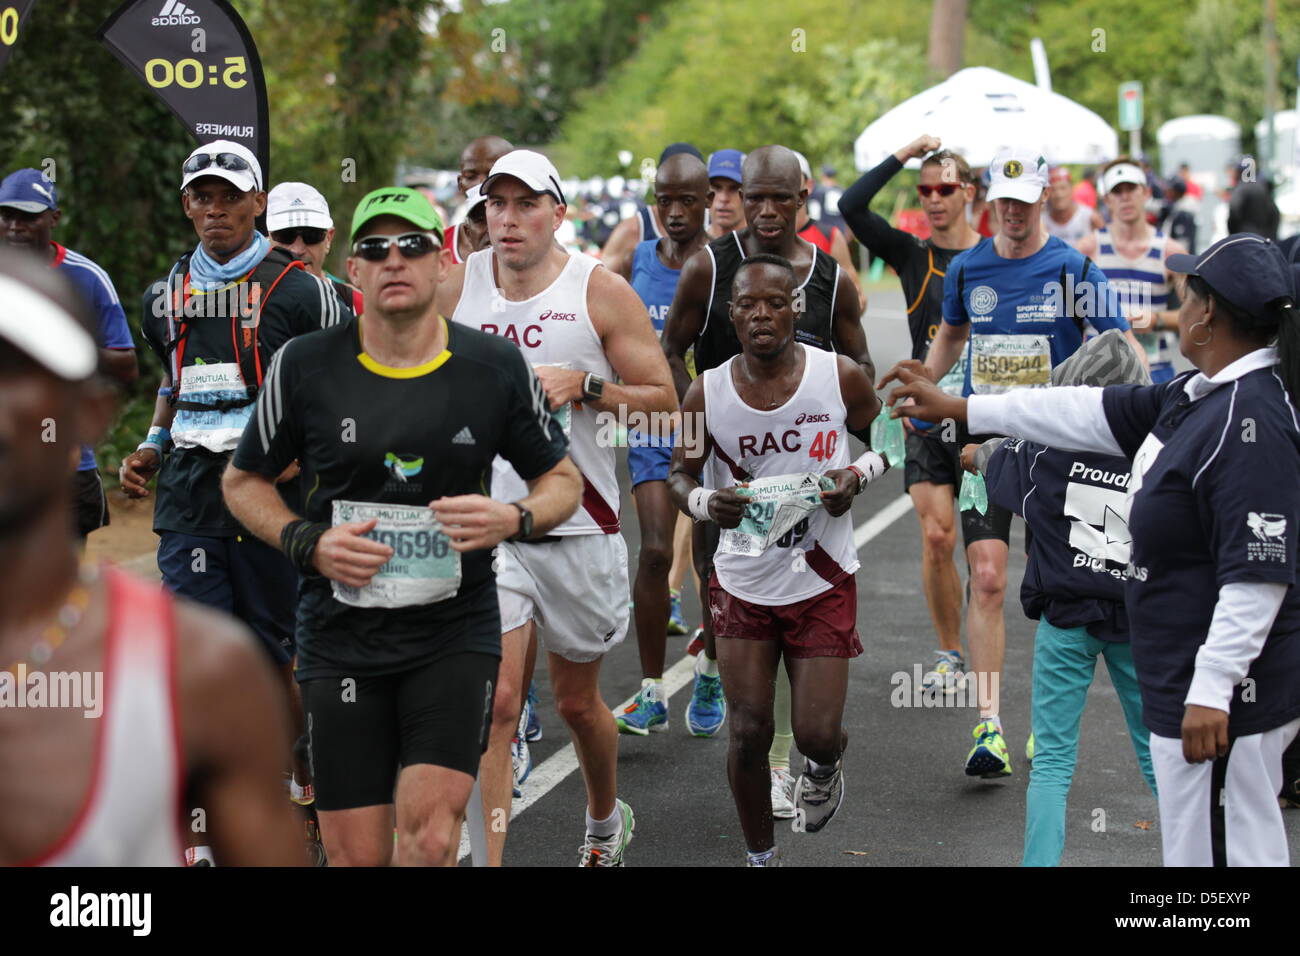 Cape Town, South Africa. 30th March, 2013. Competitors of the 44th consecutive Old Mutual Two Oceans Marathon in Cape Town. Over 10700 runners took part in what has been called 'the world's most beautiful marathon'. Stock Photo